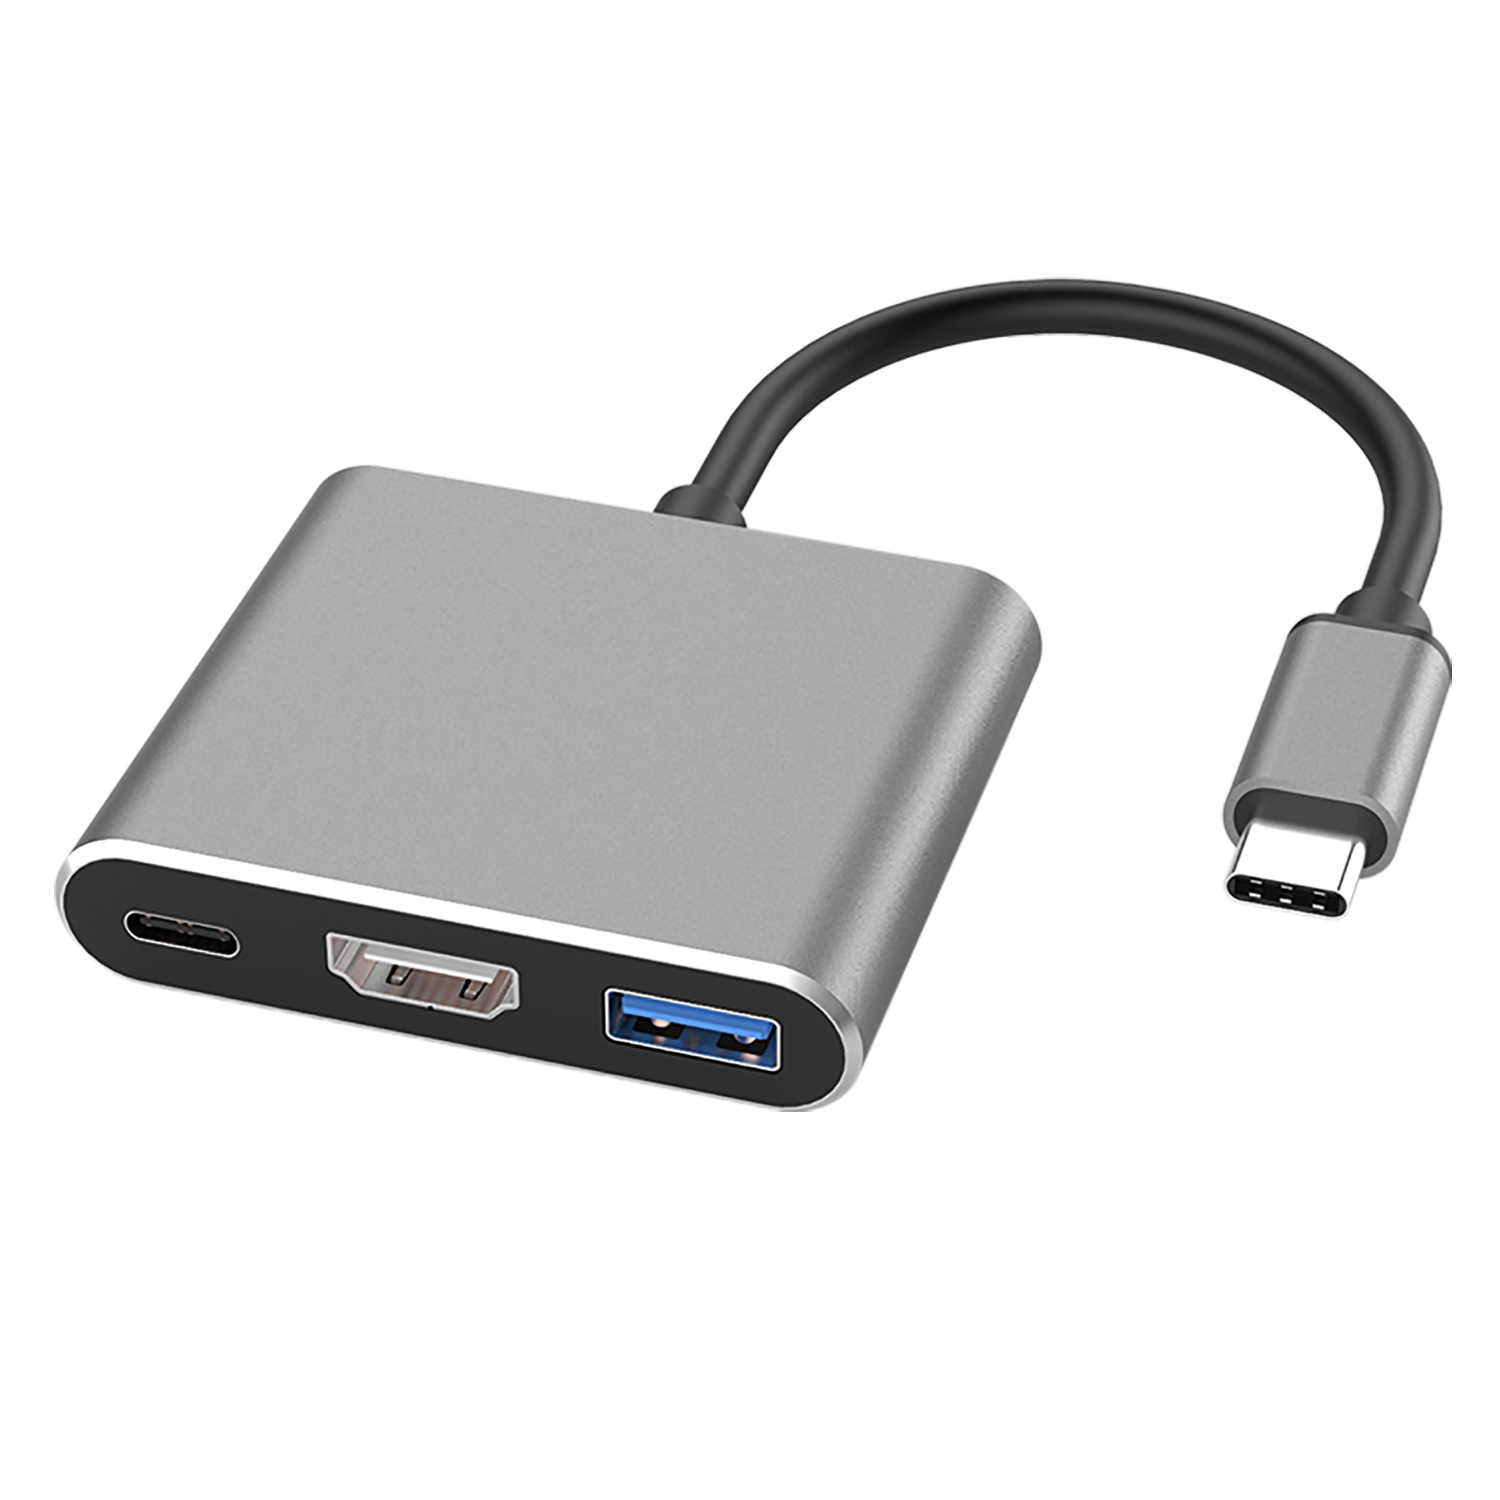 Type-C to HDMI USB 3.1 Adapter 3-in-1 USB- C PD (Power Delivery) Recha